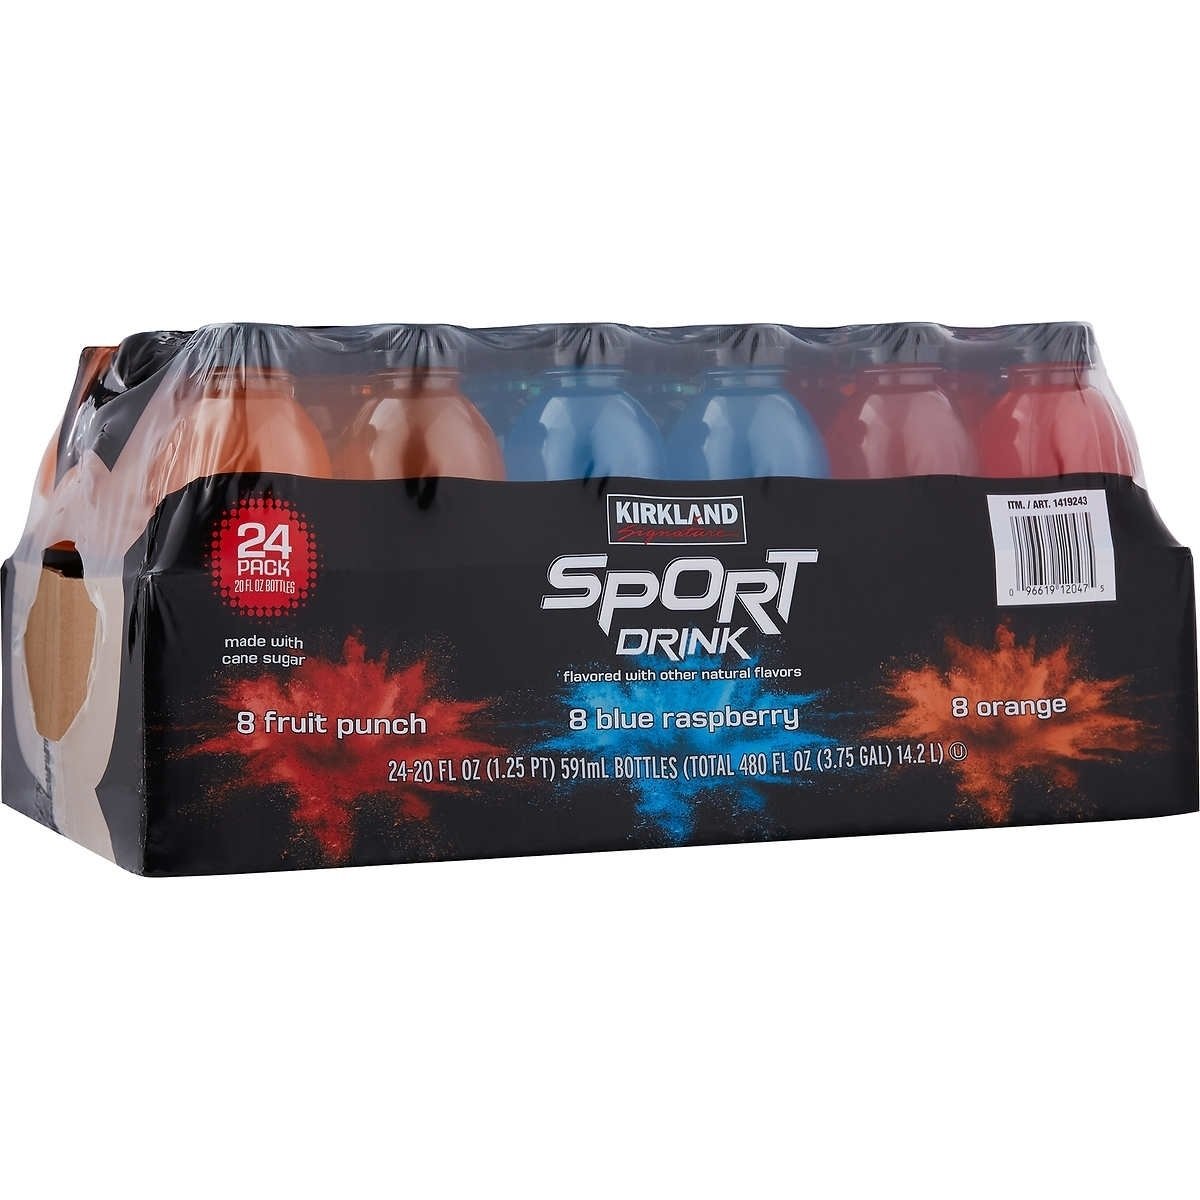 Kirkland Signature Sports Drink Variety, 20 Ounce (24 Count)